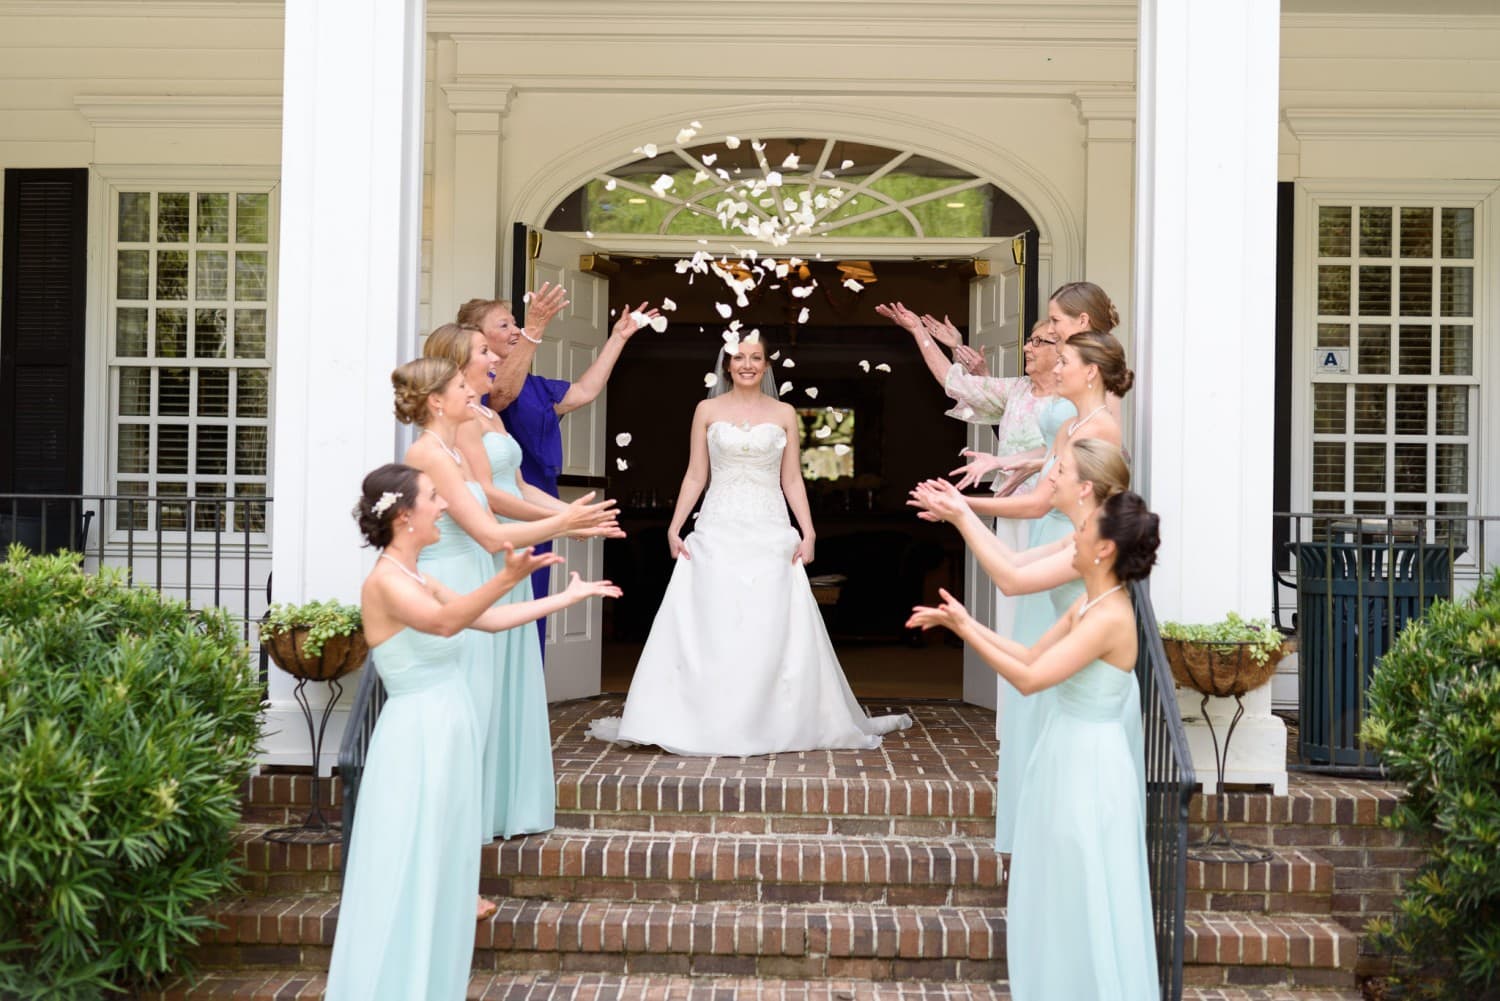 Bridesmaids throwing flower pedals over bride - Pawleys Plantation